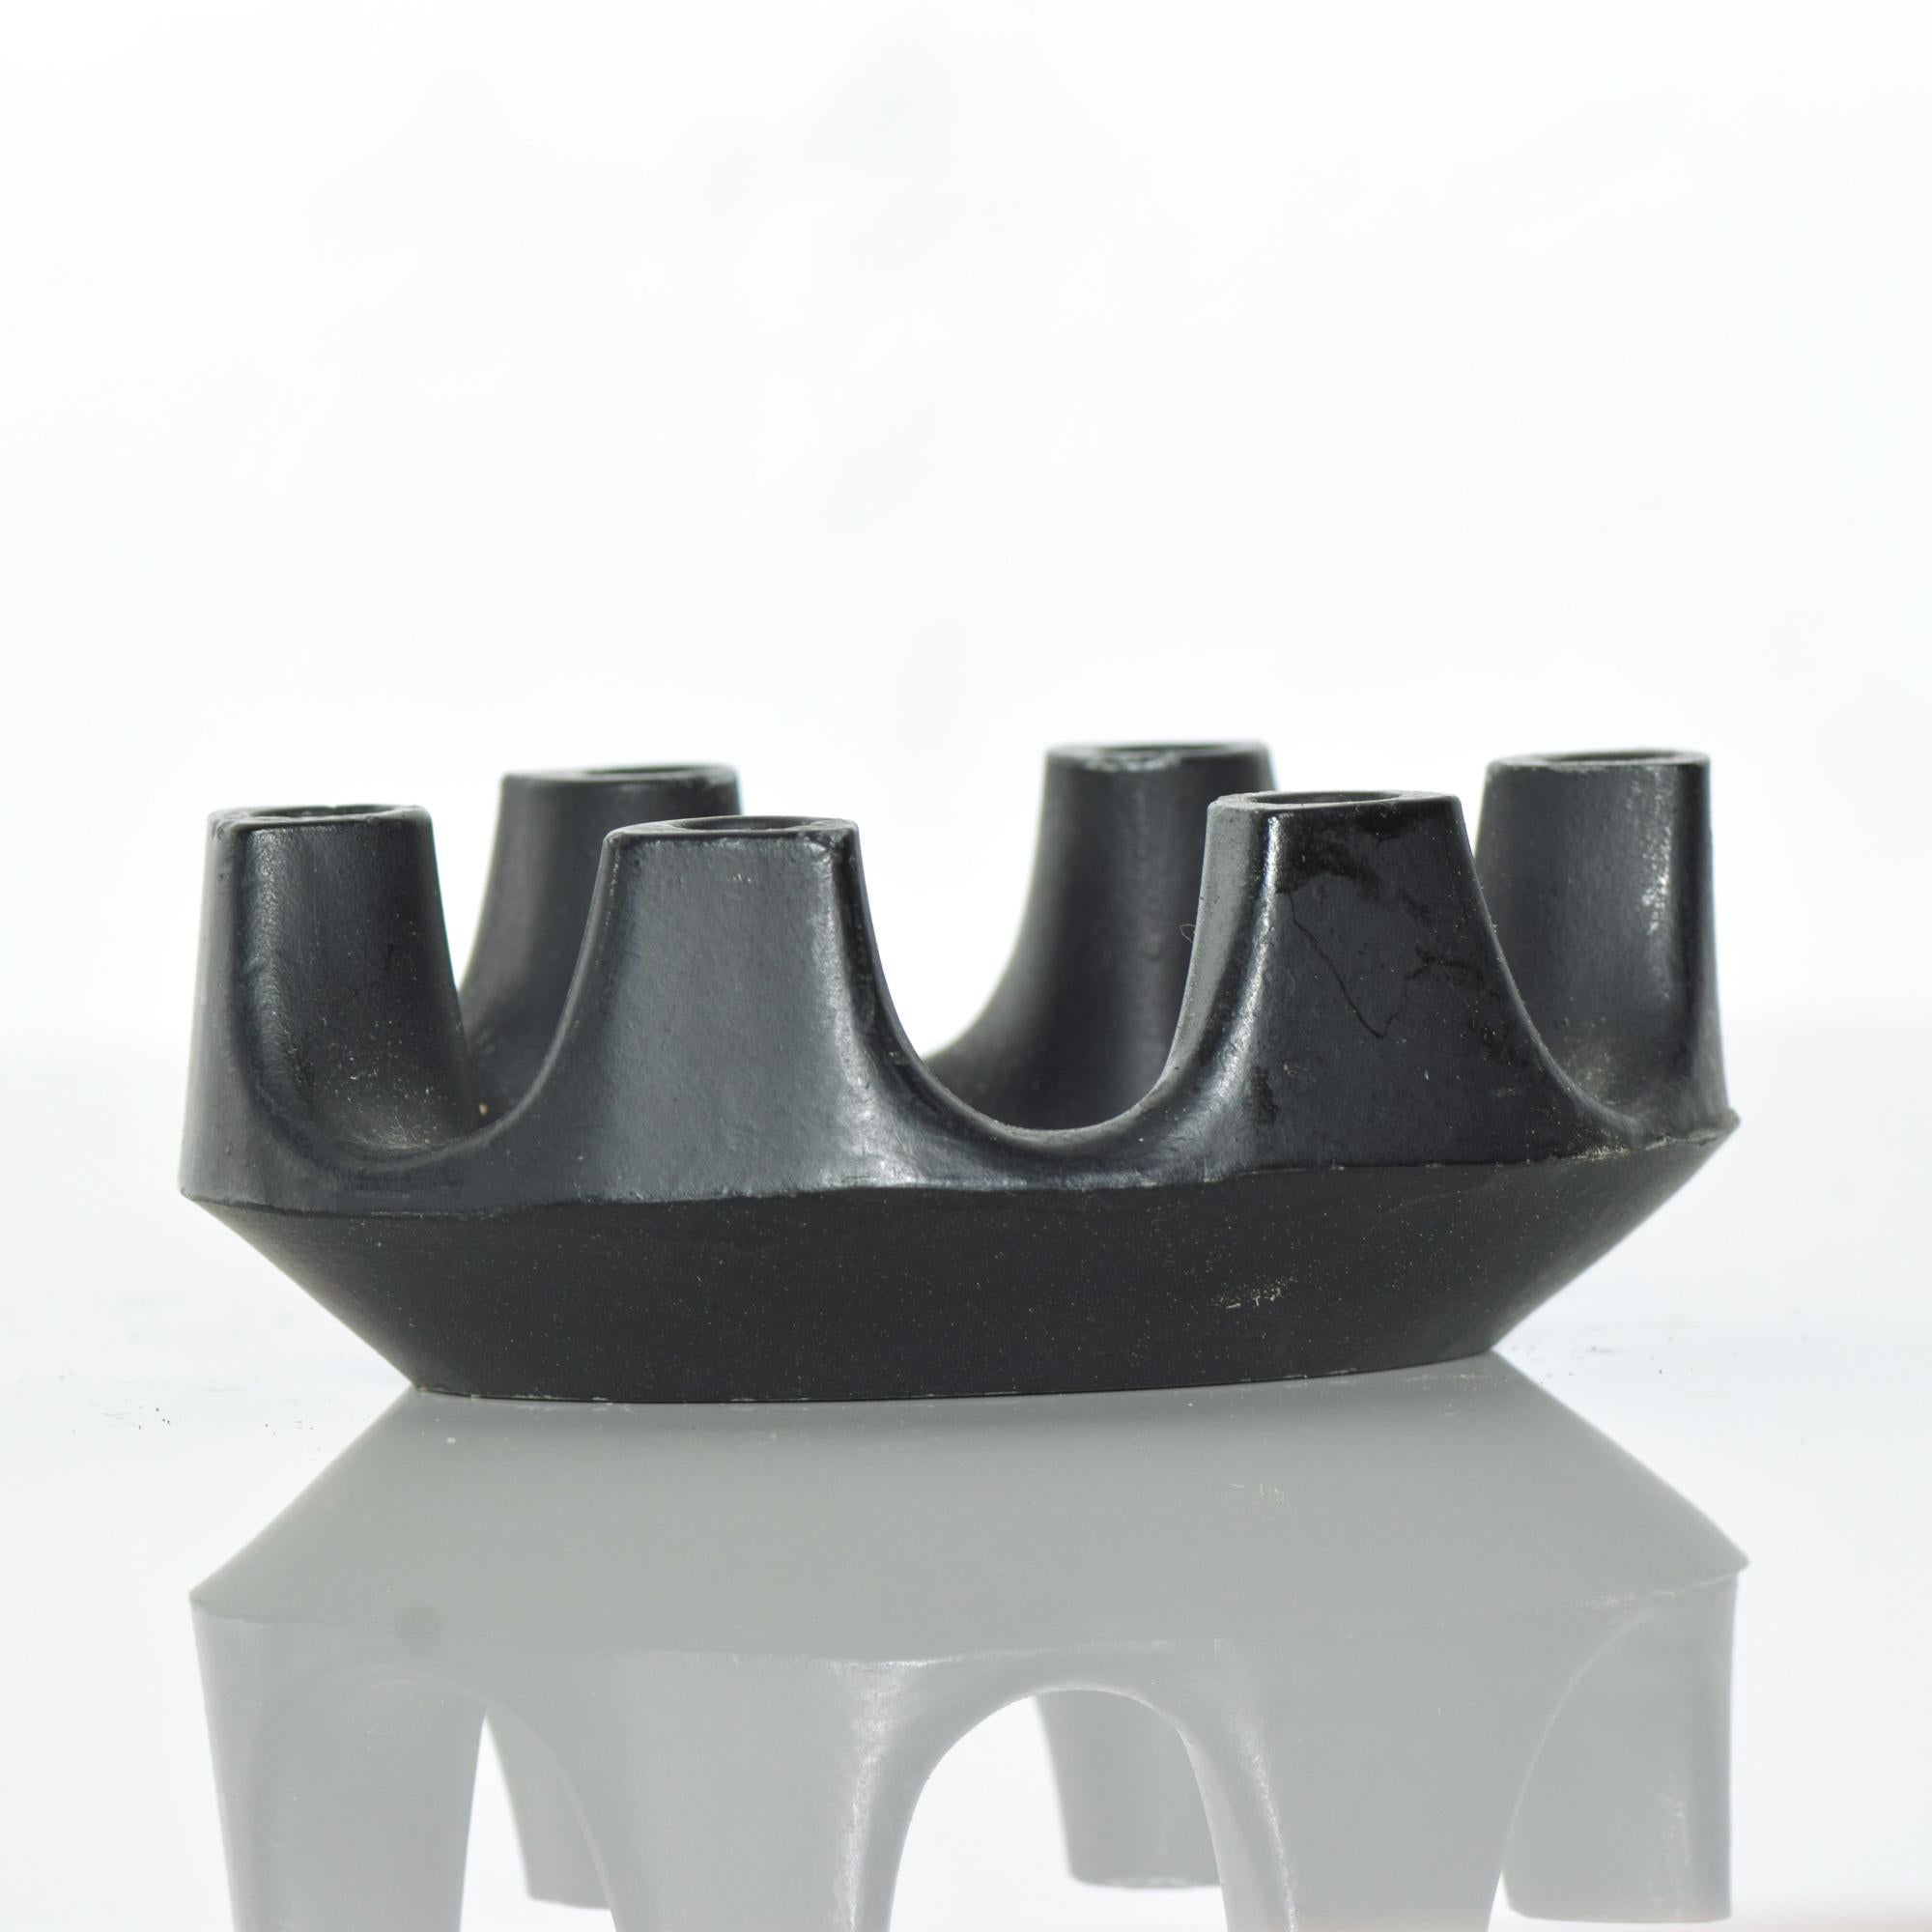 Modern refined Brutalist crown six candlestick candleholder in a sculpted iron oval ring, 1970s
Measures: 3 7/8